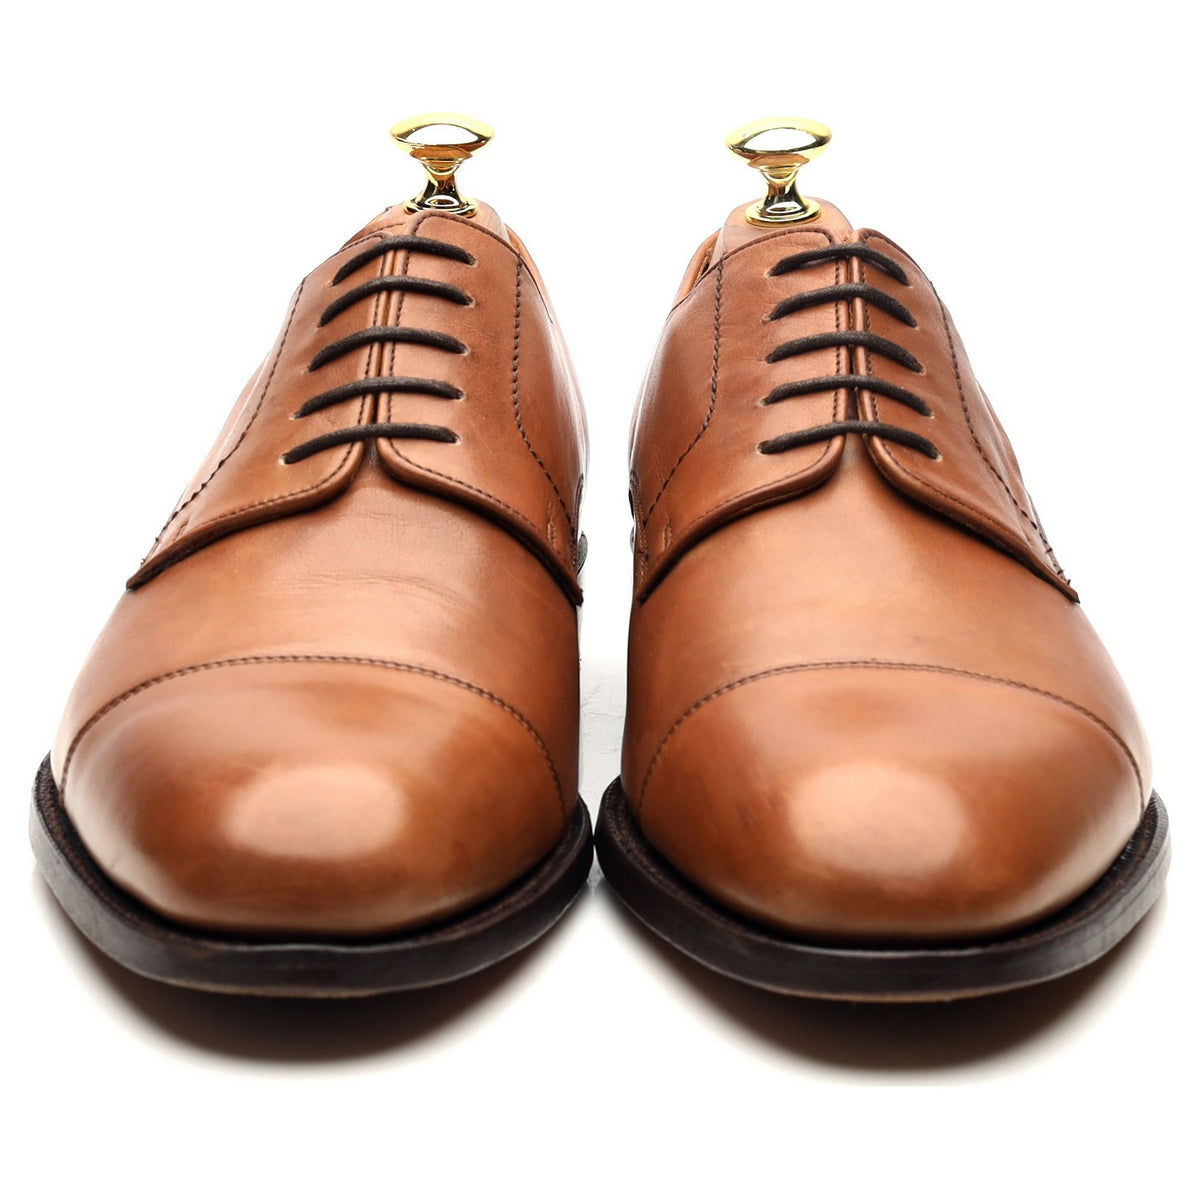 &#39;Epping&#39; Tan Brown Leather Derby UK 8.5 G